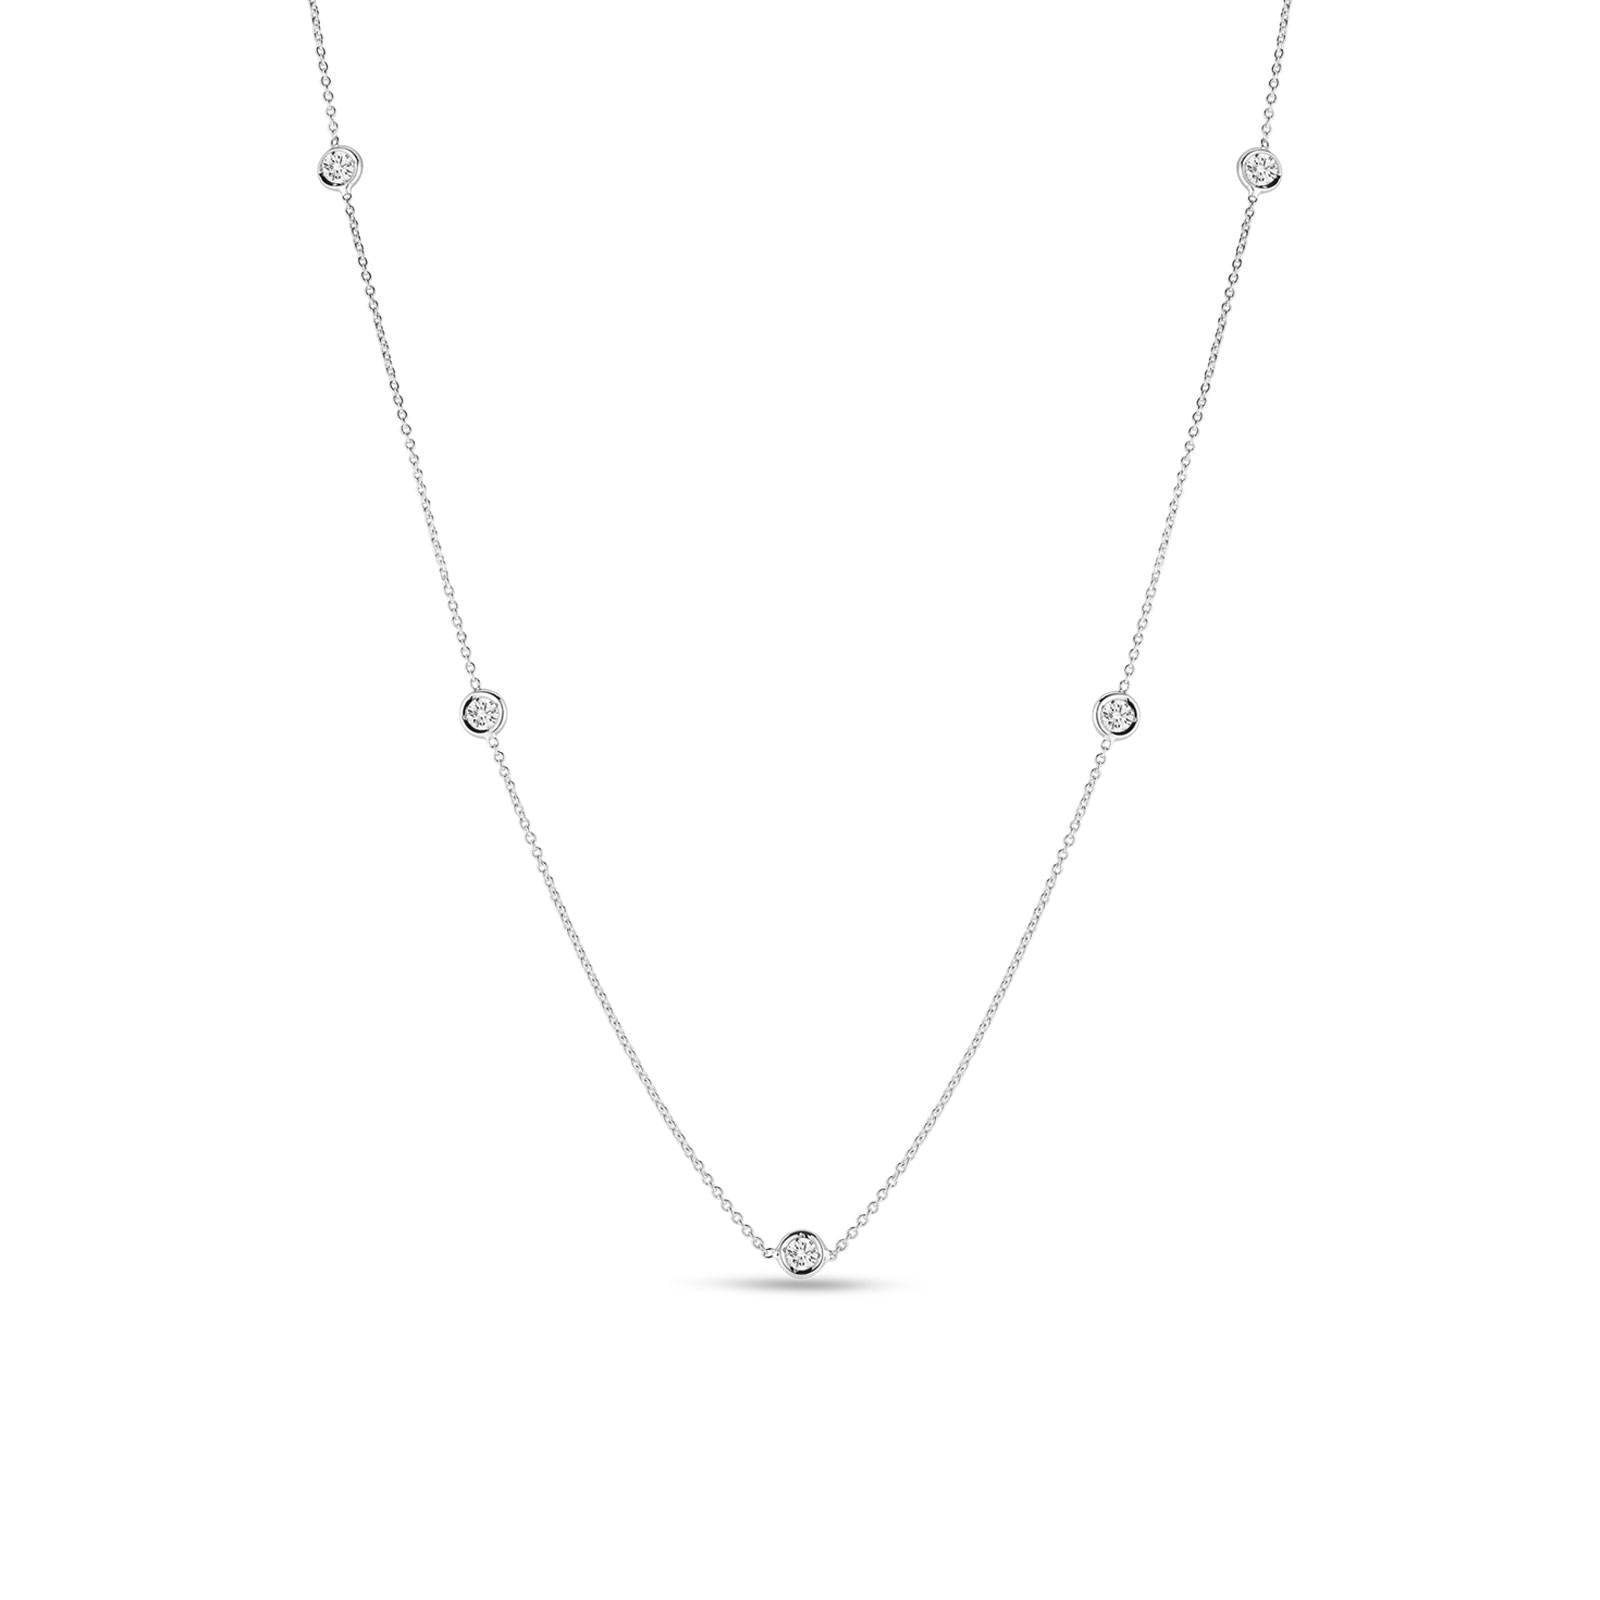 18K WHITE GOLD DIAMONDS BY THE INCH 5 STATION NECKLACE